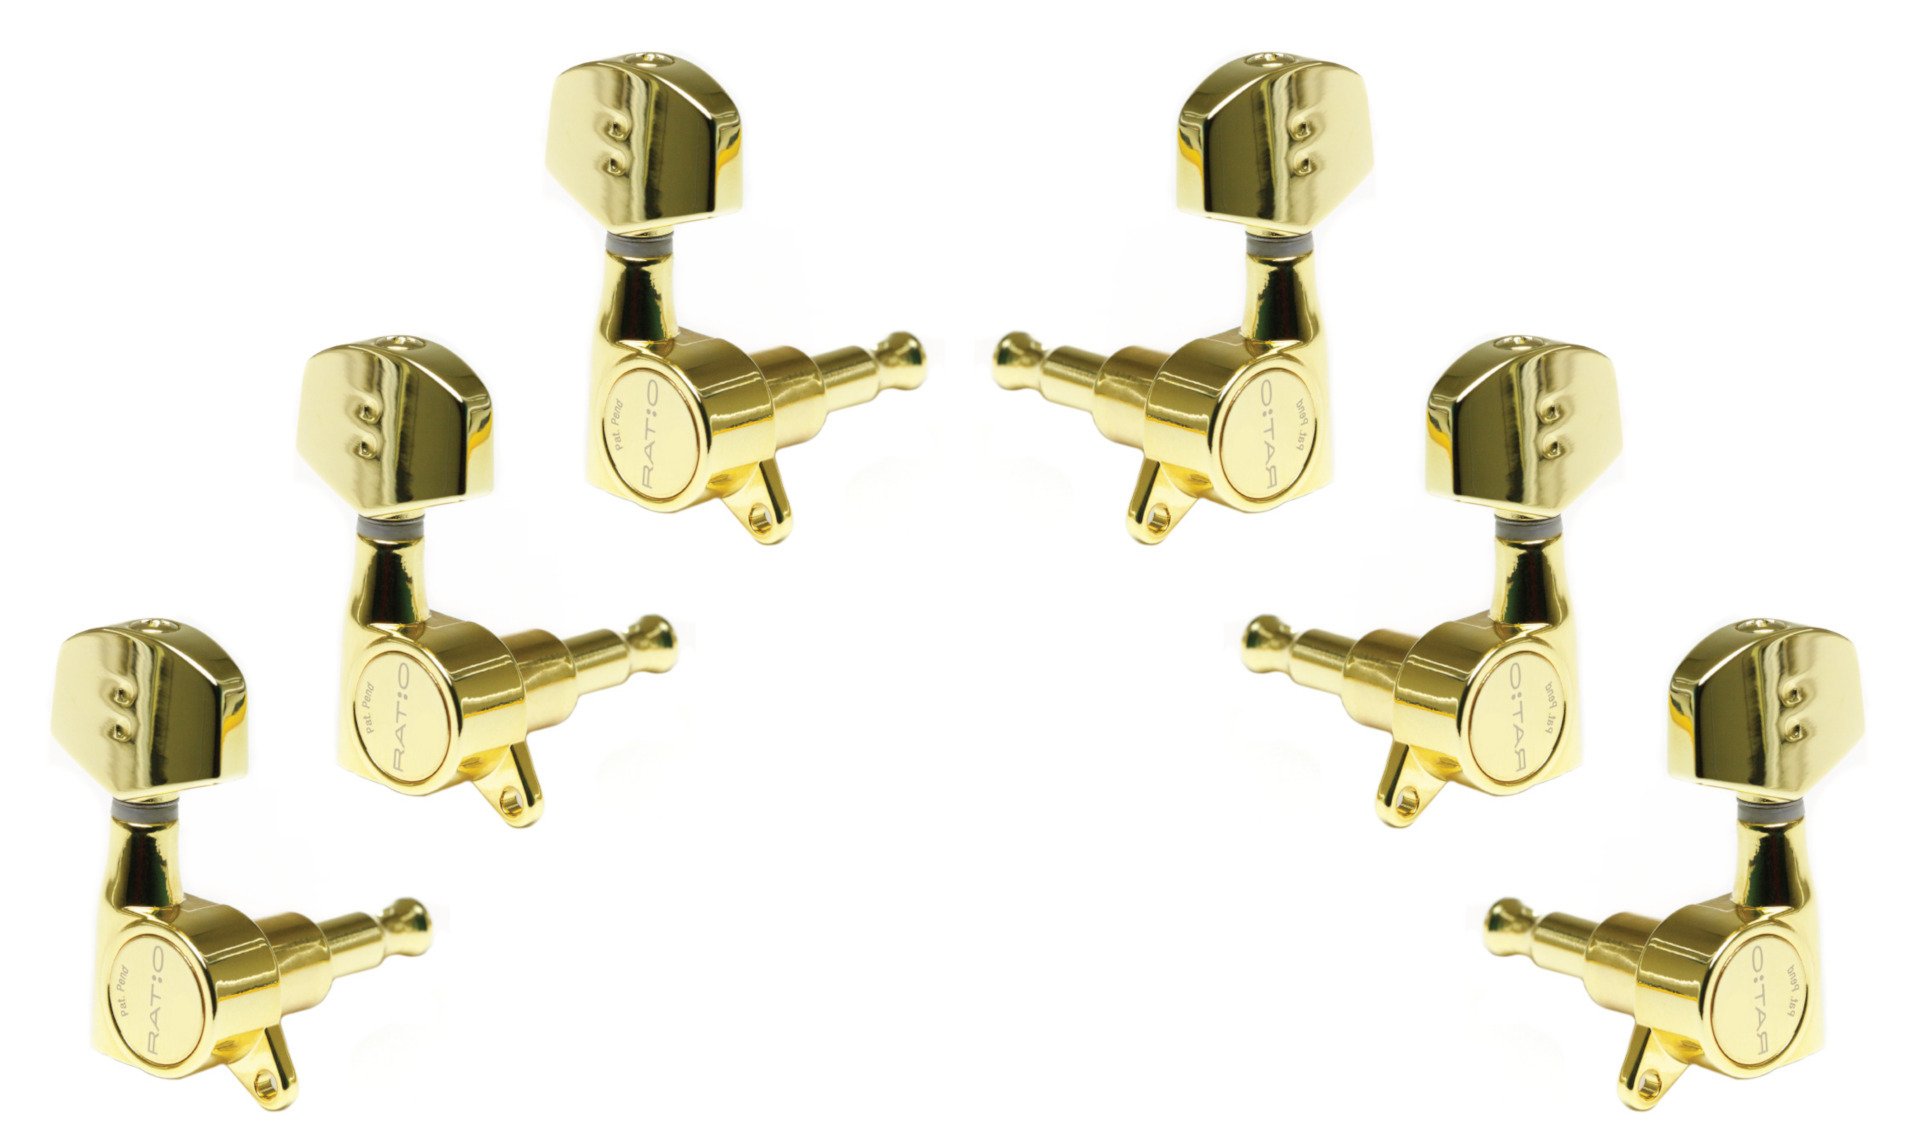 Graph Tech PRN-4311-G0 Ratio Electric Guitar Machine Heads with Contemporary Button, Offset Screw - 3 + 3 - Gold